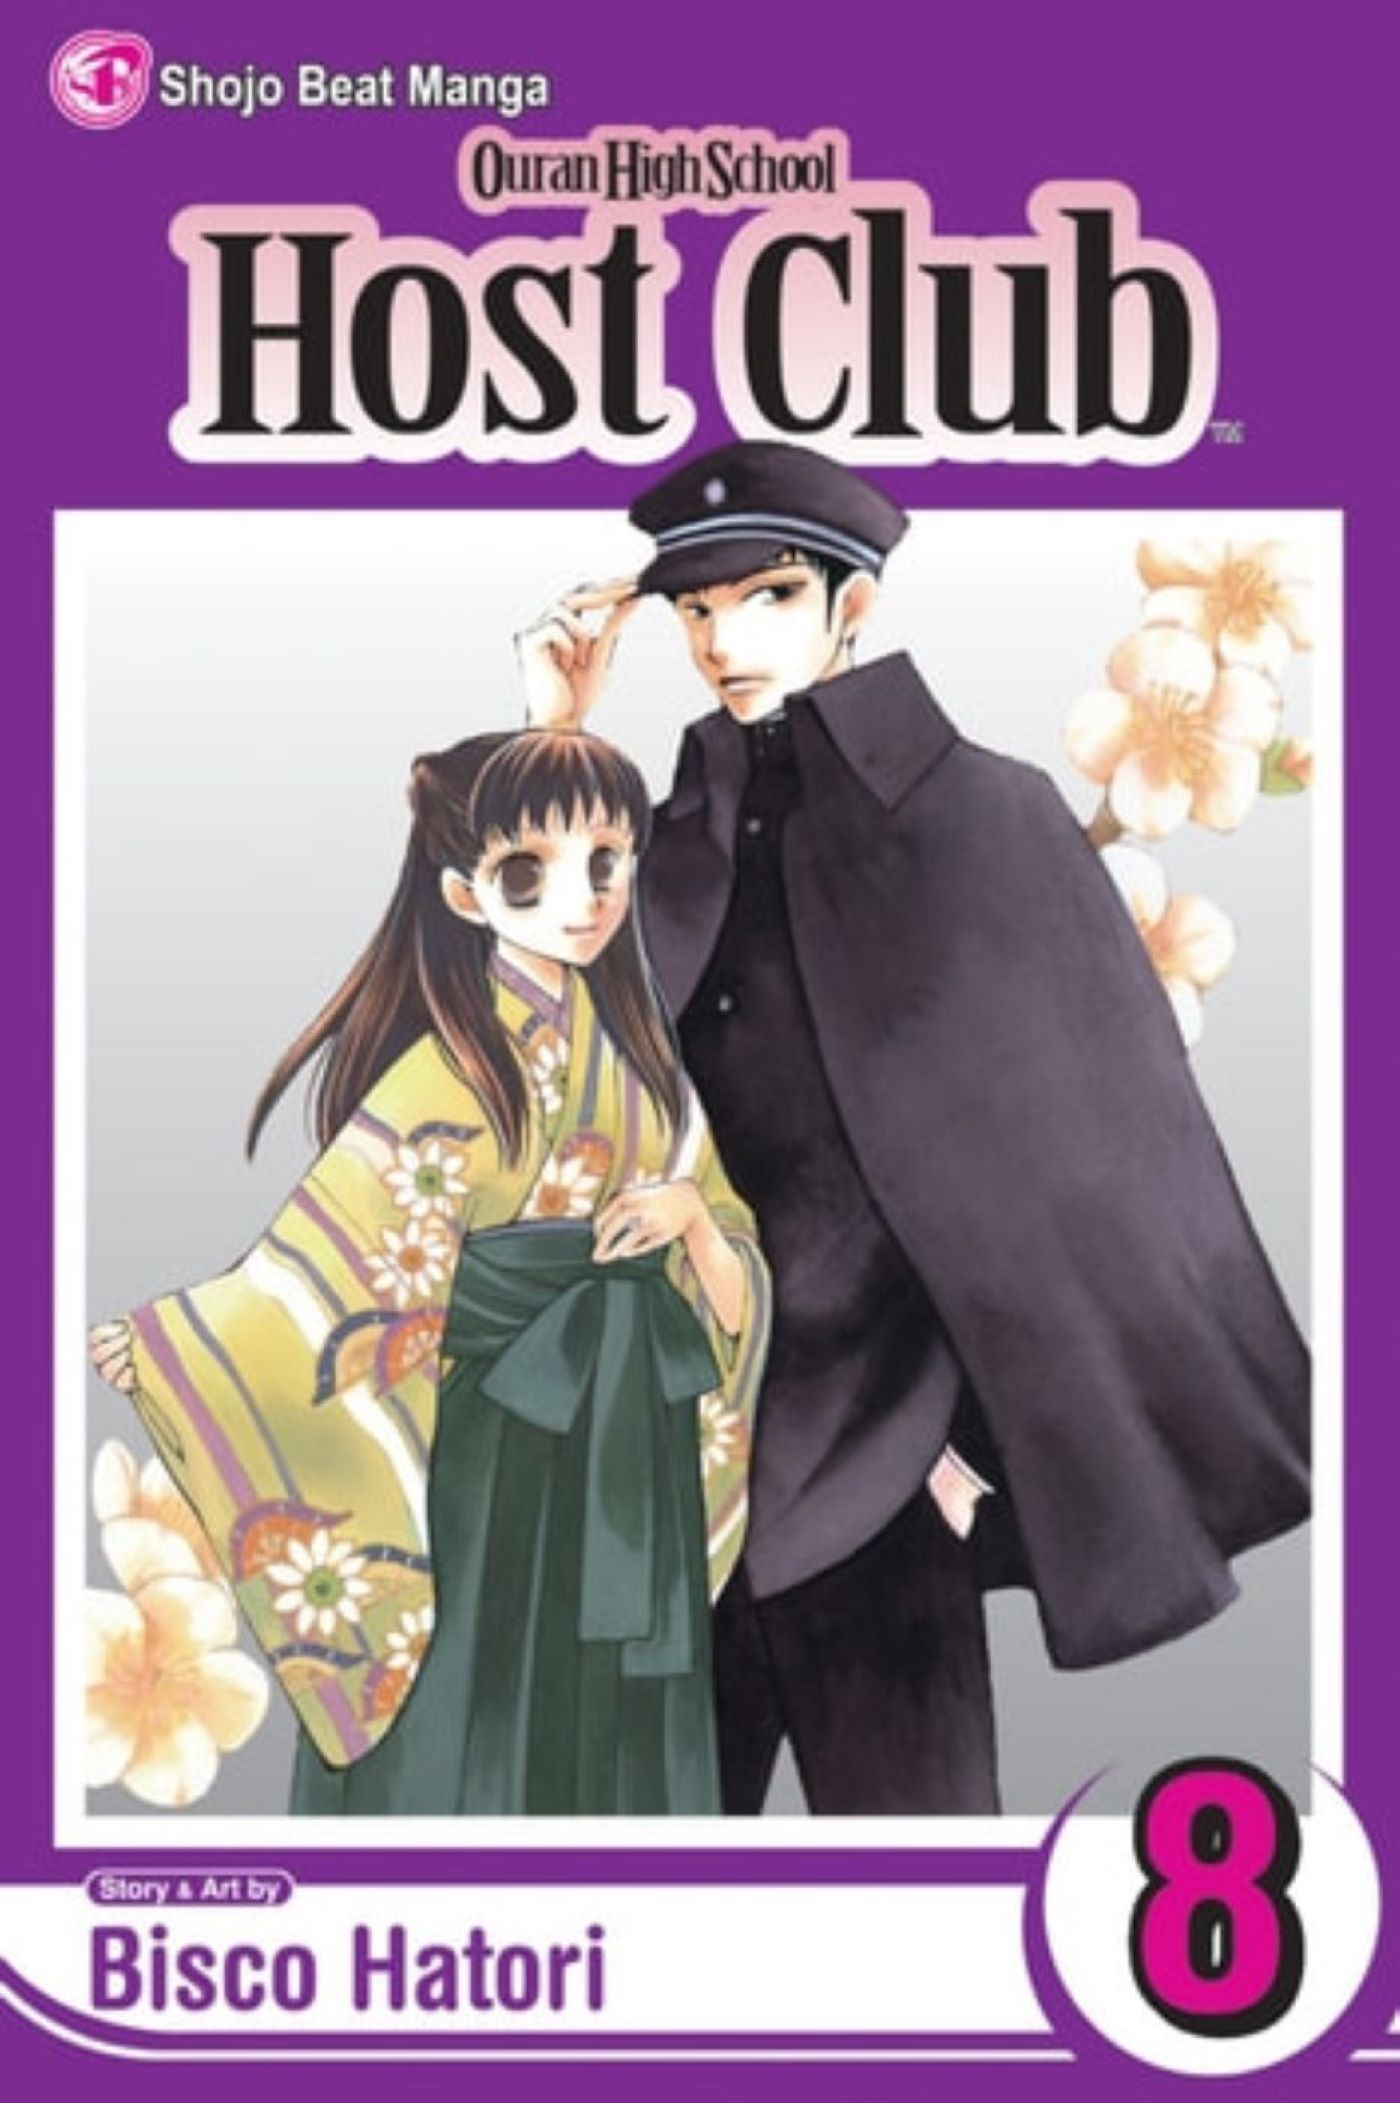 Ouran High School Host Club - Volume 8 - Mori and Haruhi wearing older Japanese clothes